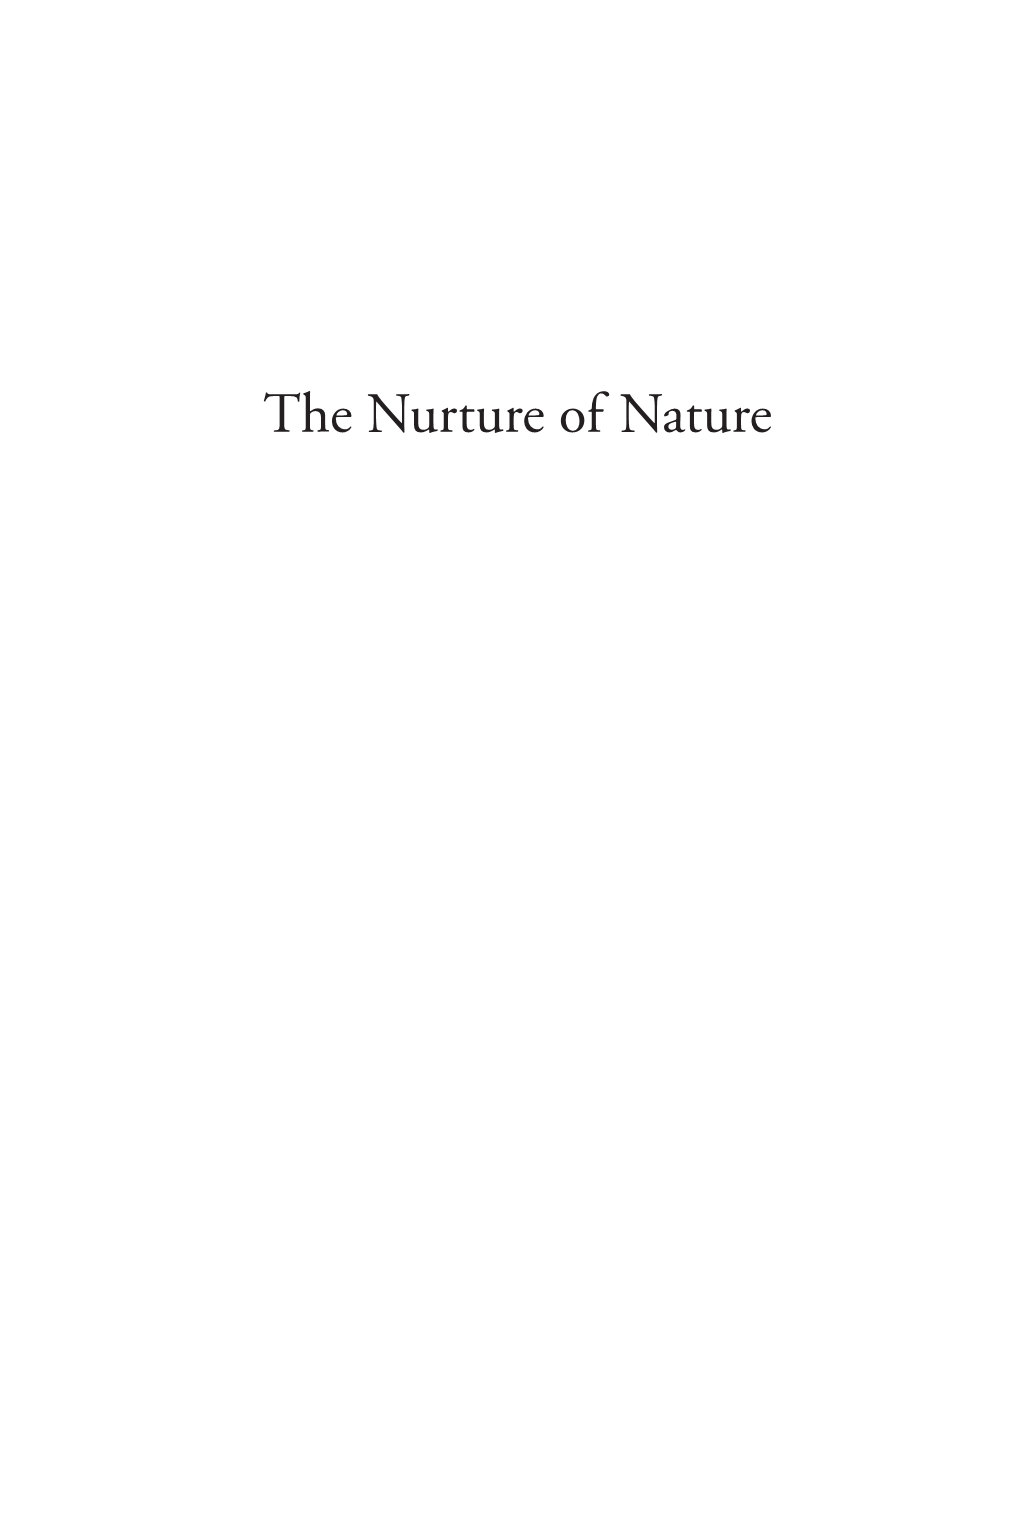 The Nurture of Nature the Nature | History | Society Series Is Devoted to the Publication of High-Quality Scholarship in Environmental History and Allied ﬁelds